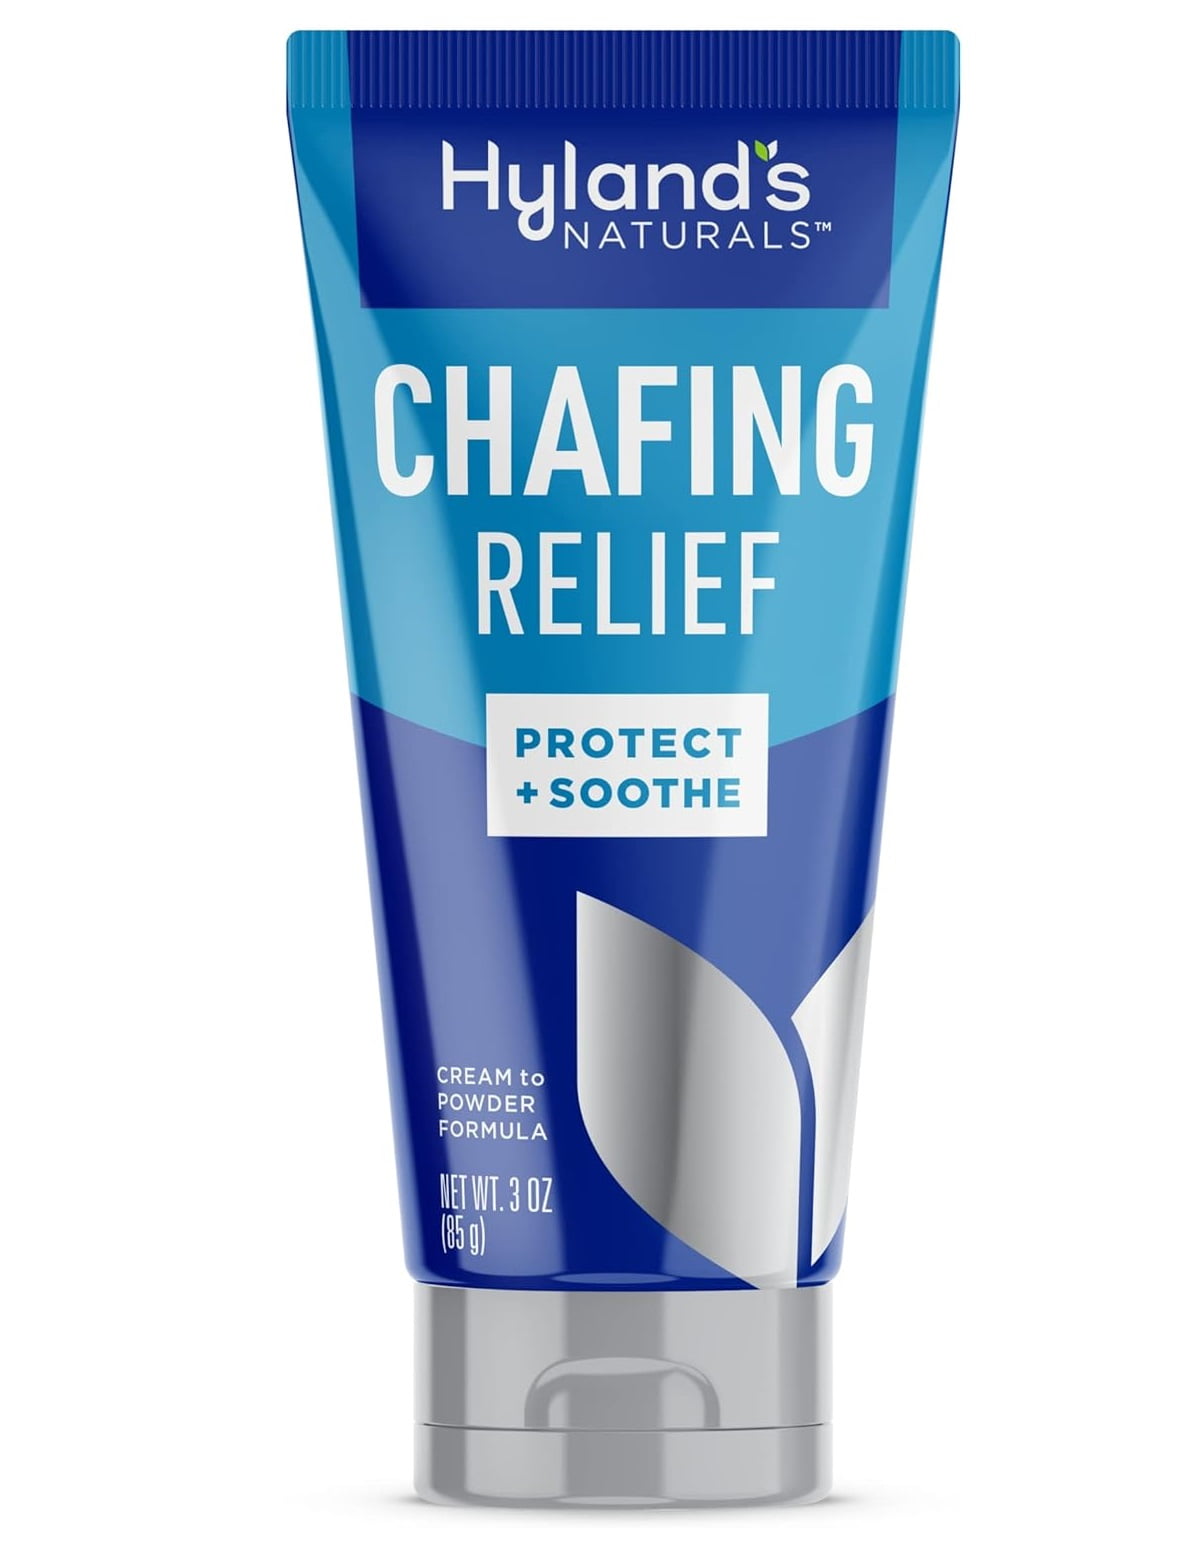 Hyland's Chafing Relief, Cream-to-powder, non-greasy formula, Protects &  Soothes Skin, 3 oz 